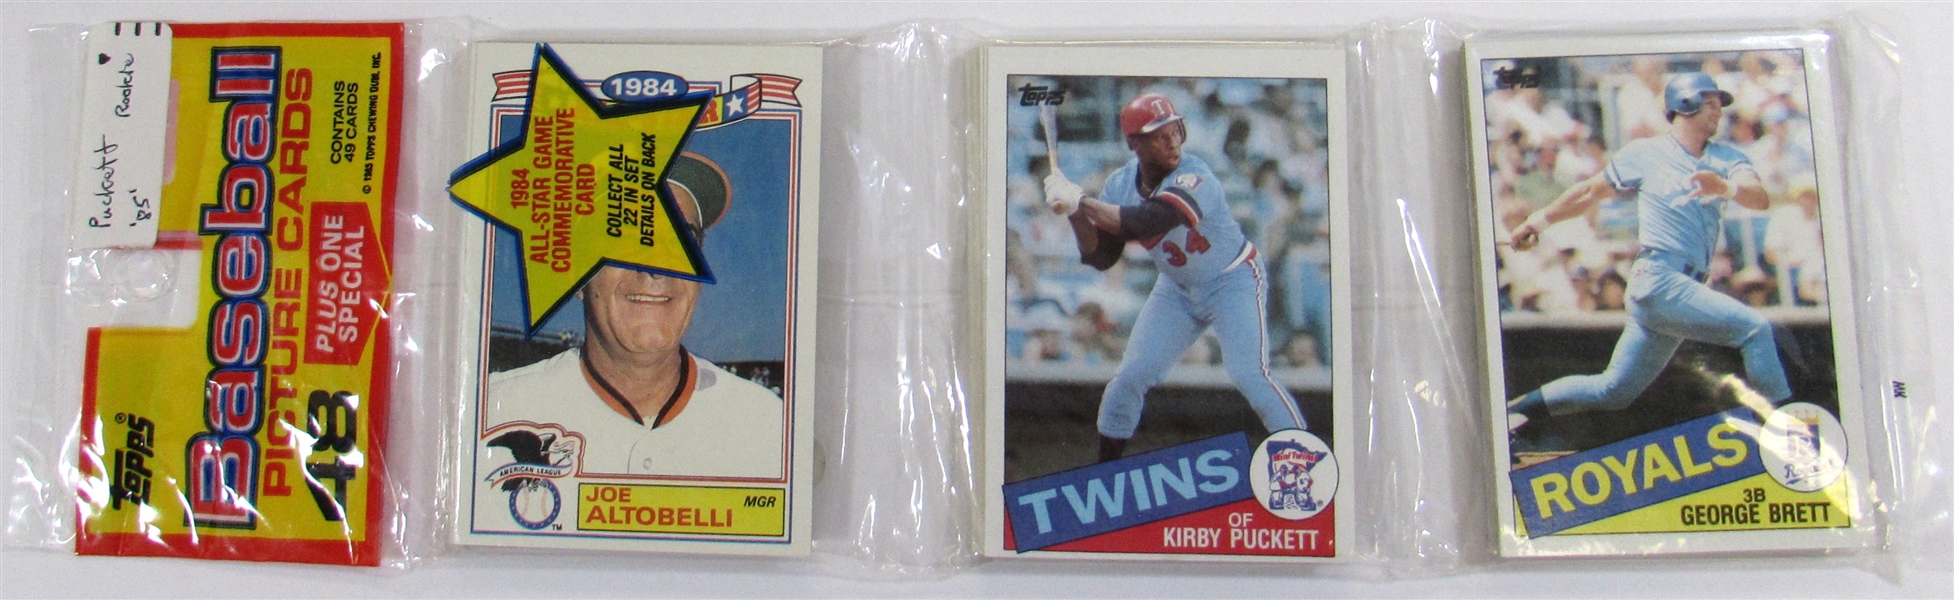 1985 Topps Rack Pack Kirby Puckett Showing